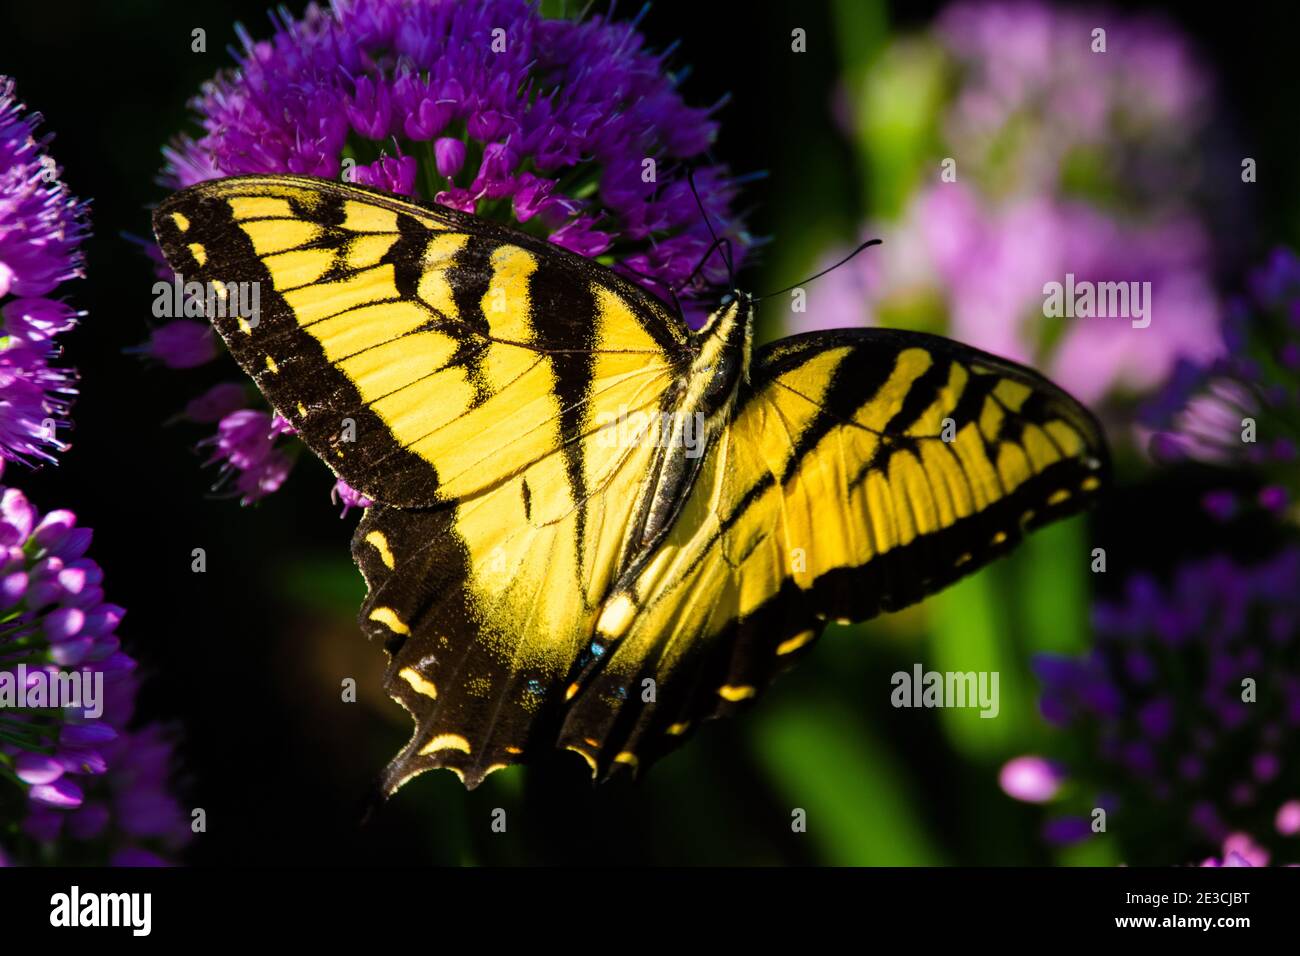 A swallowtail butterfly gets nectar from a purple allium flower. Stock Photo